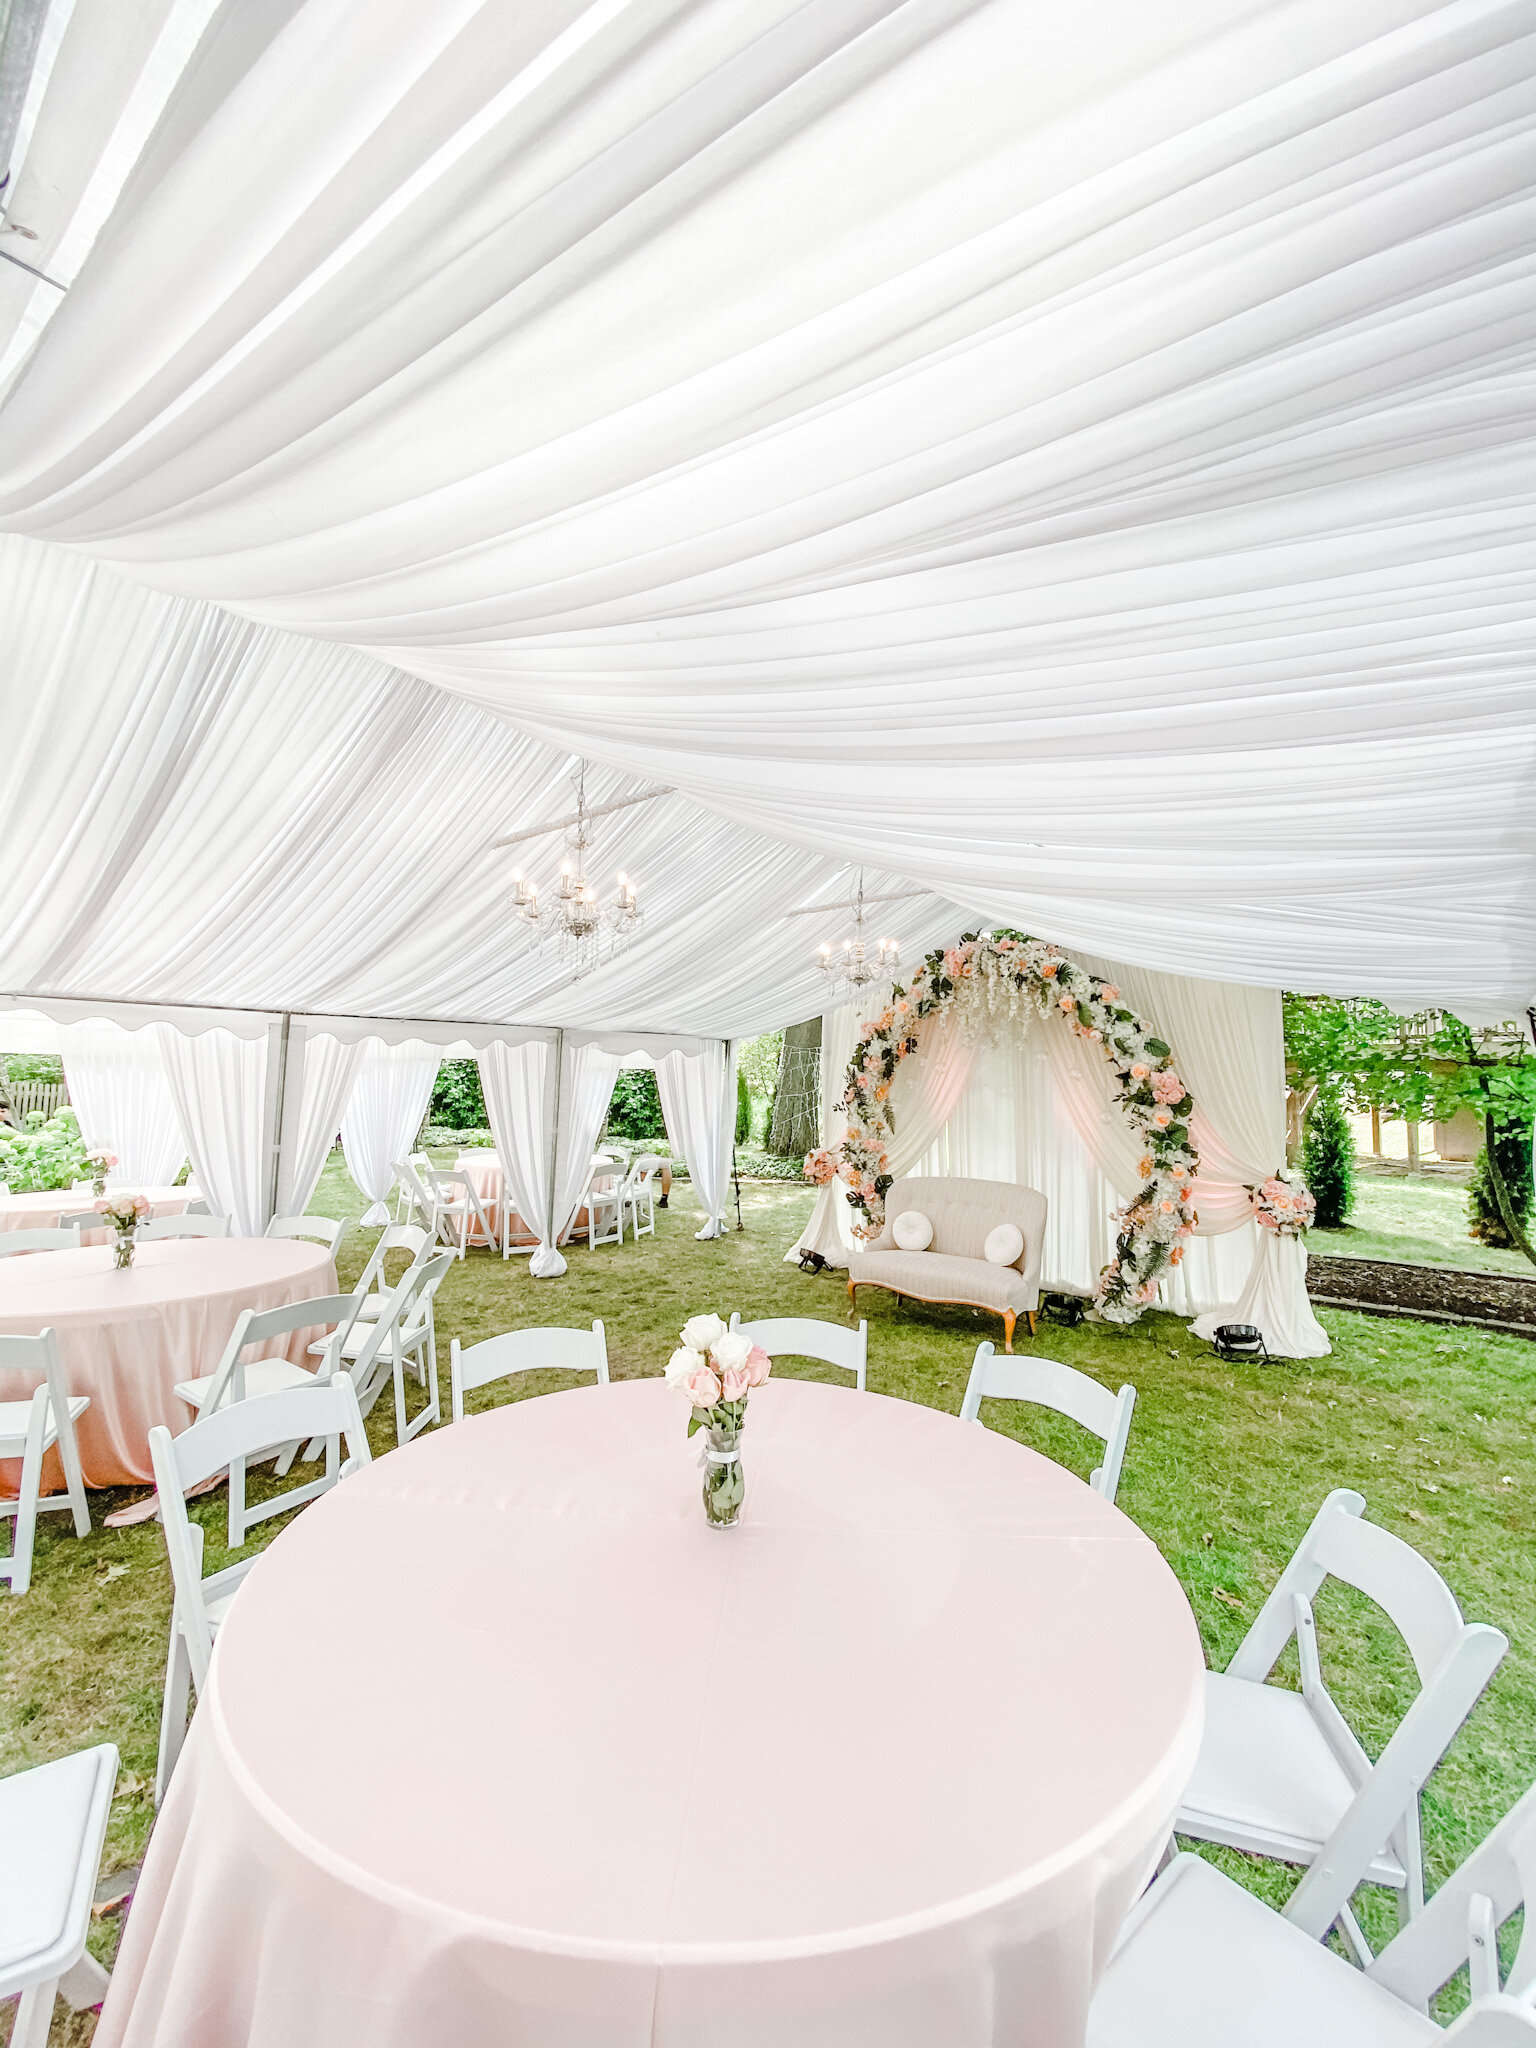 tent rental in Napervill eoutdoor party decoration backyard wedding micro wedding outdoor party rental naperville frame tents festival tent birthday party tent backyard wedding tent corpporate event tent   (10).JPG